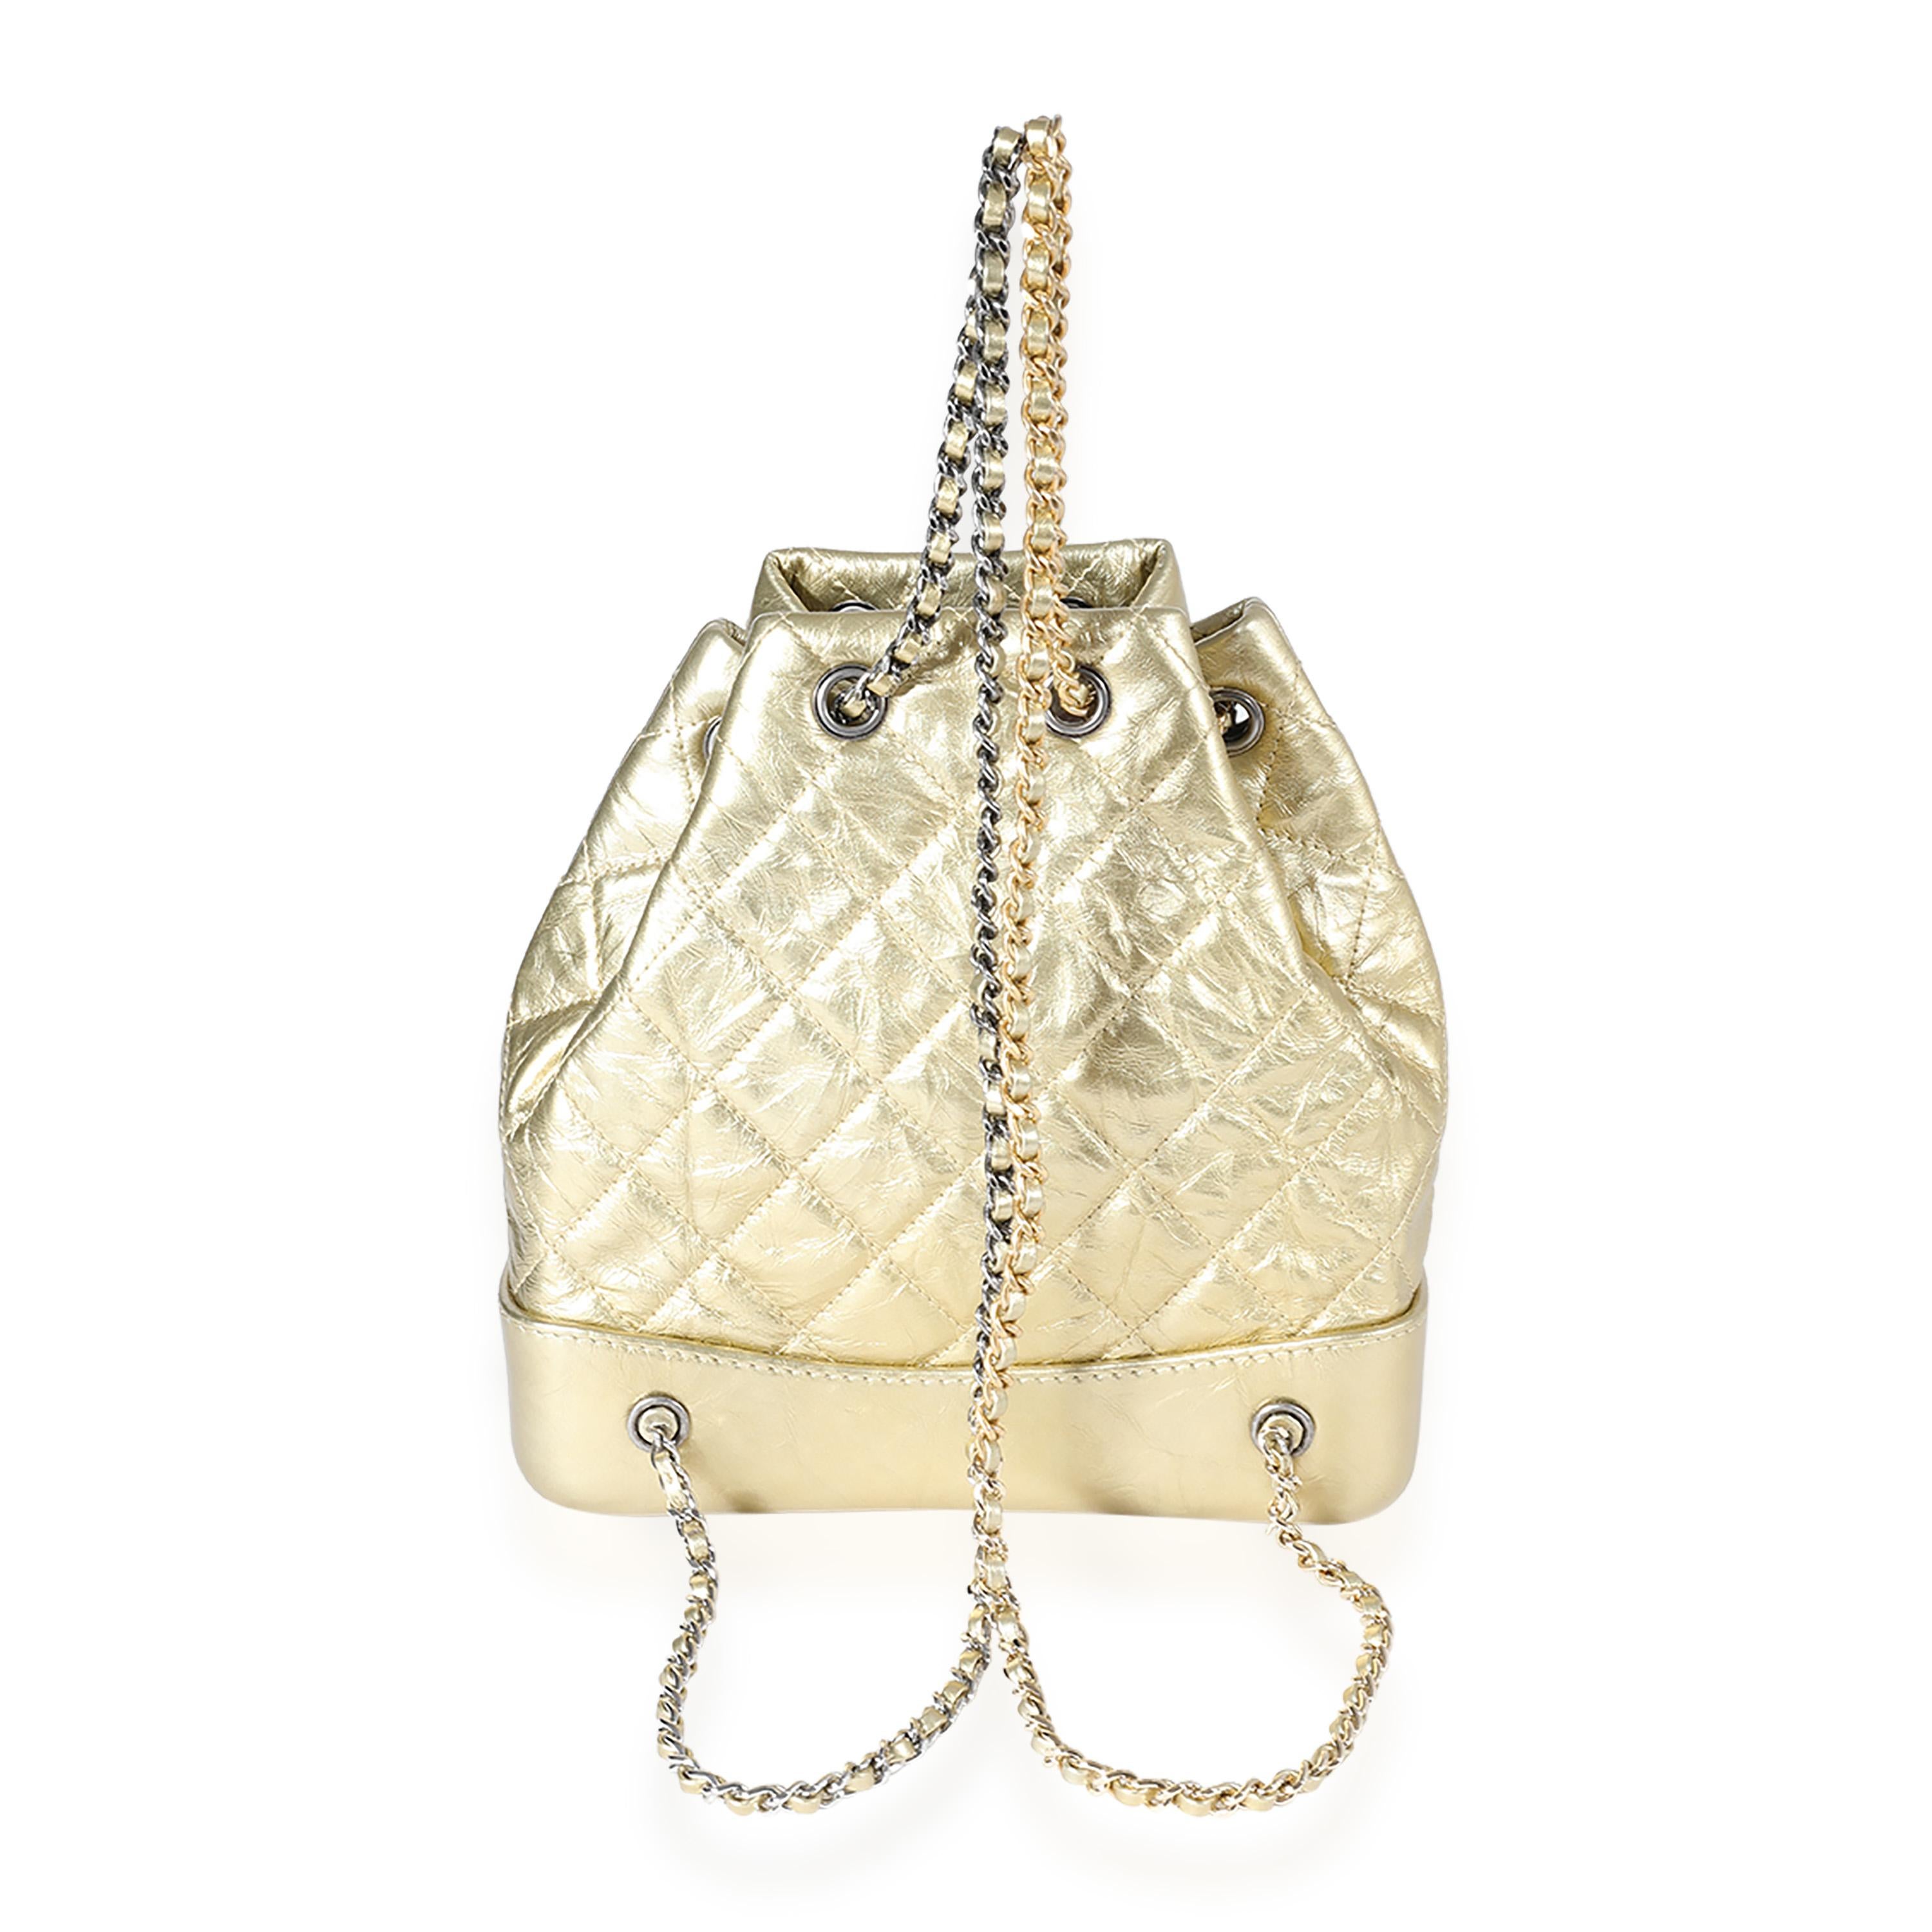 Listing Title: Chanel Metallic Gold Quilted Calfskin Small Gabrielle Backpack
SKU: 123033
Condition: Pre-owned 
Handbag Condition: Excellent
Condition Comments: Excellent Condition. Light scuffing at interior. No other signs of wear.
Brand: